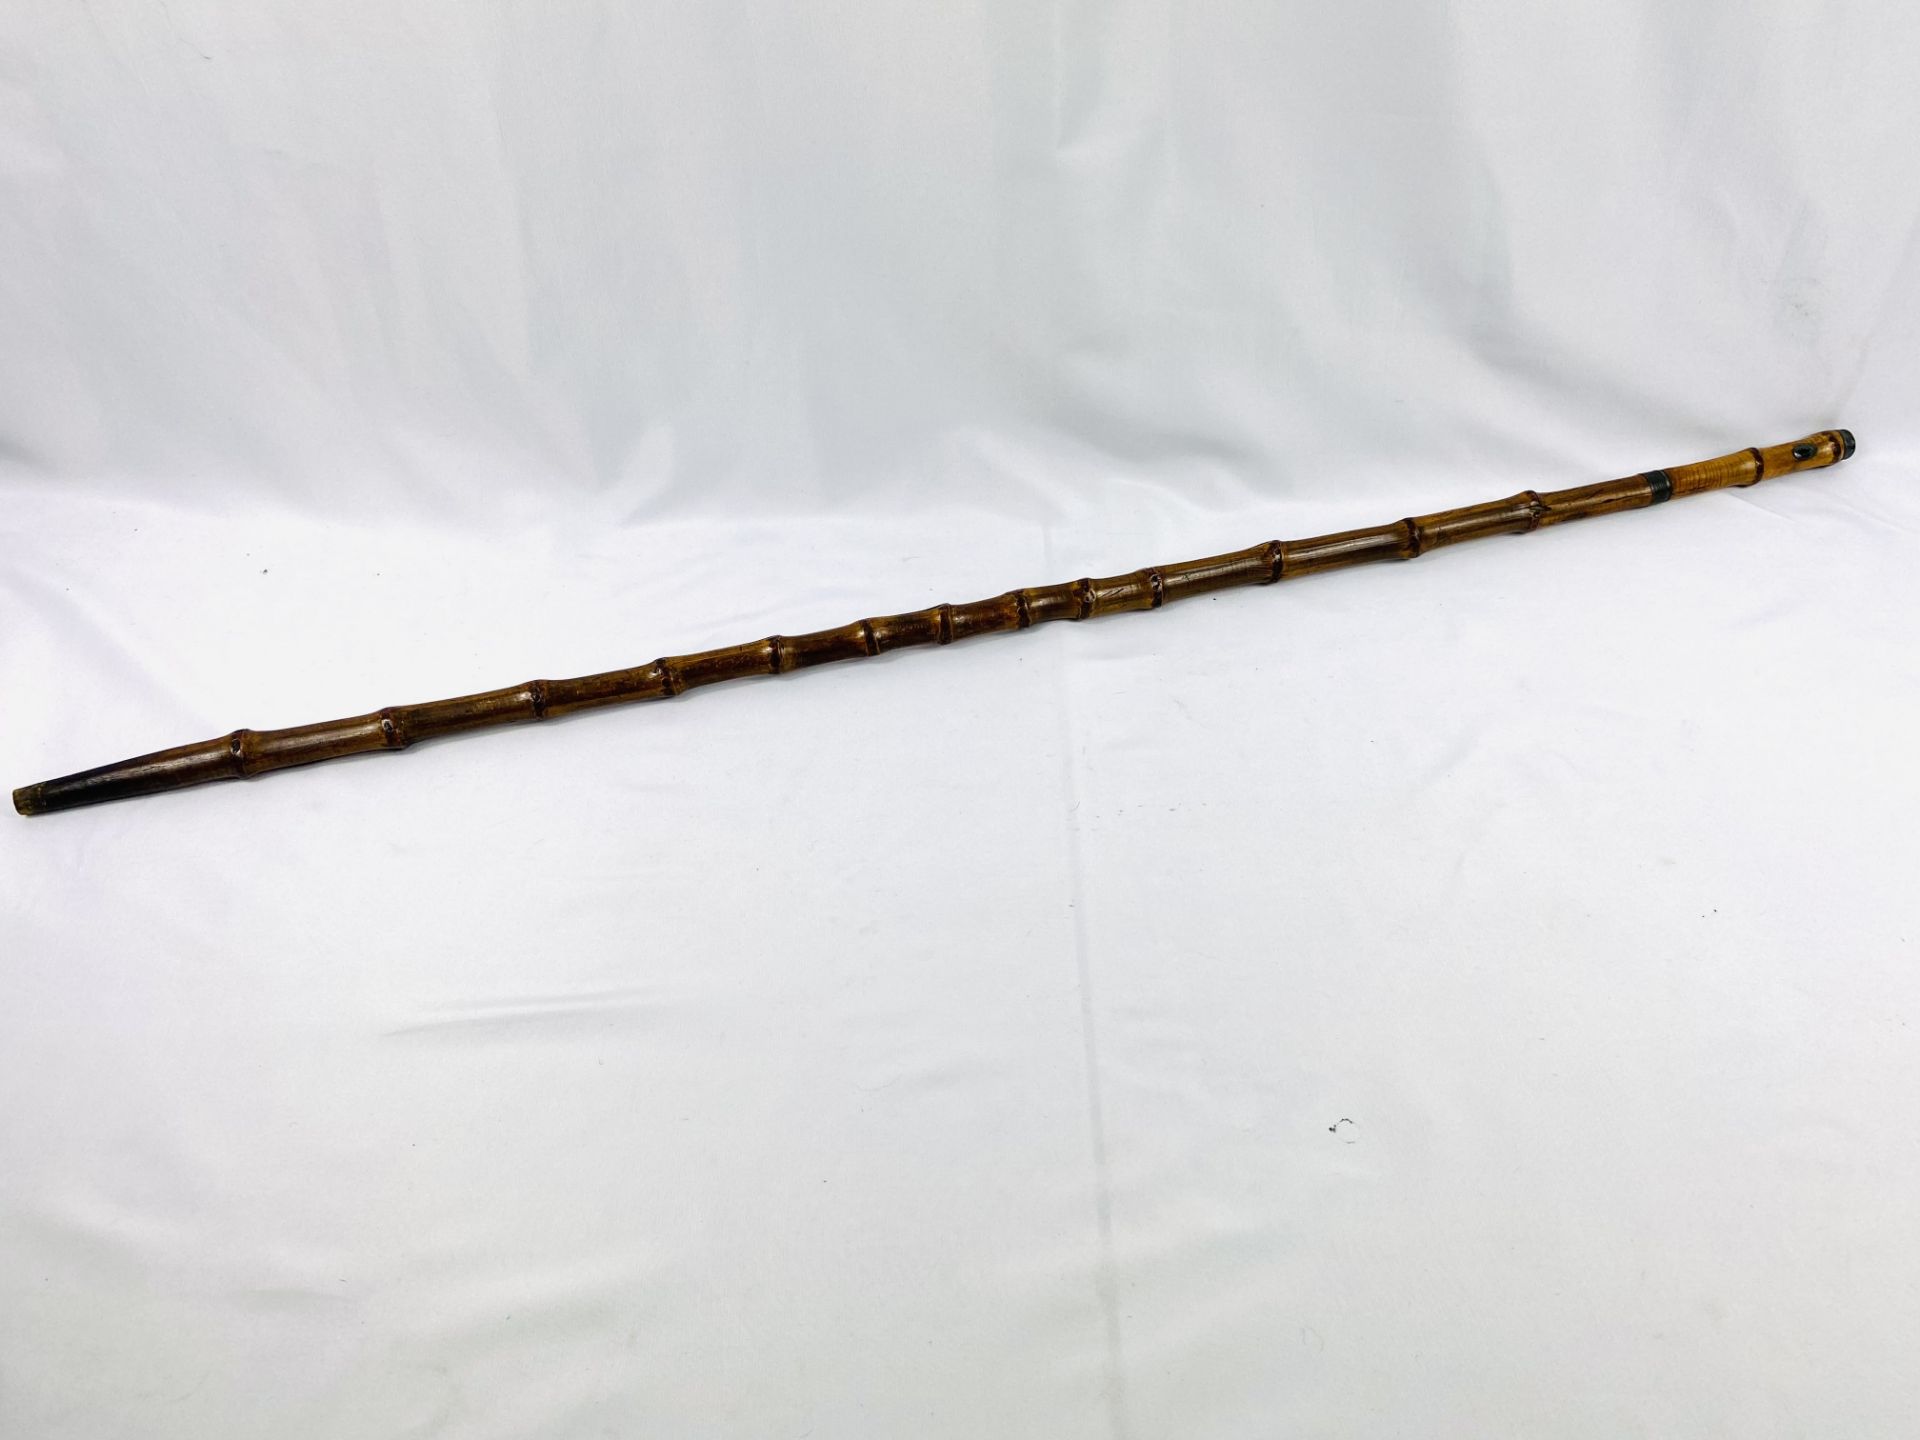 Bamboo sword stick - Image 4 of 4